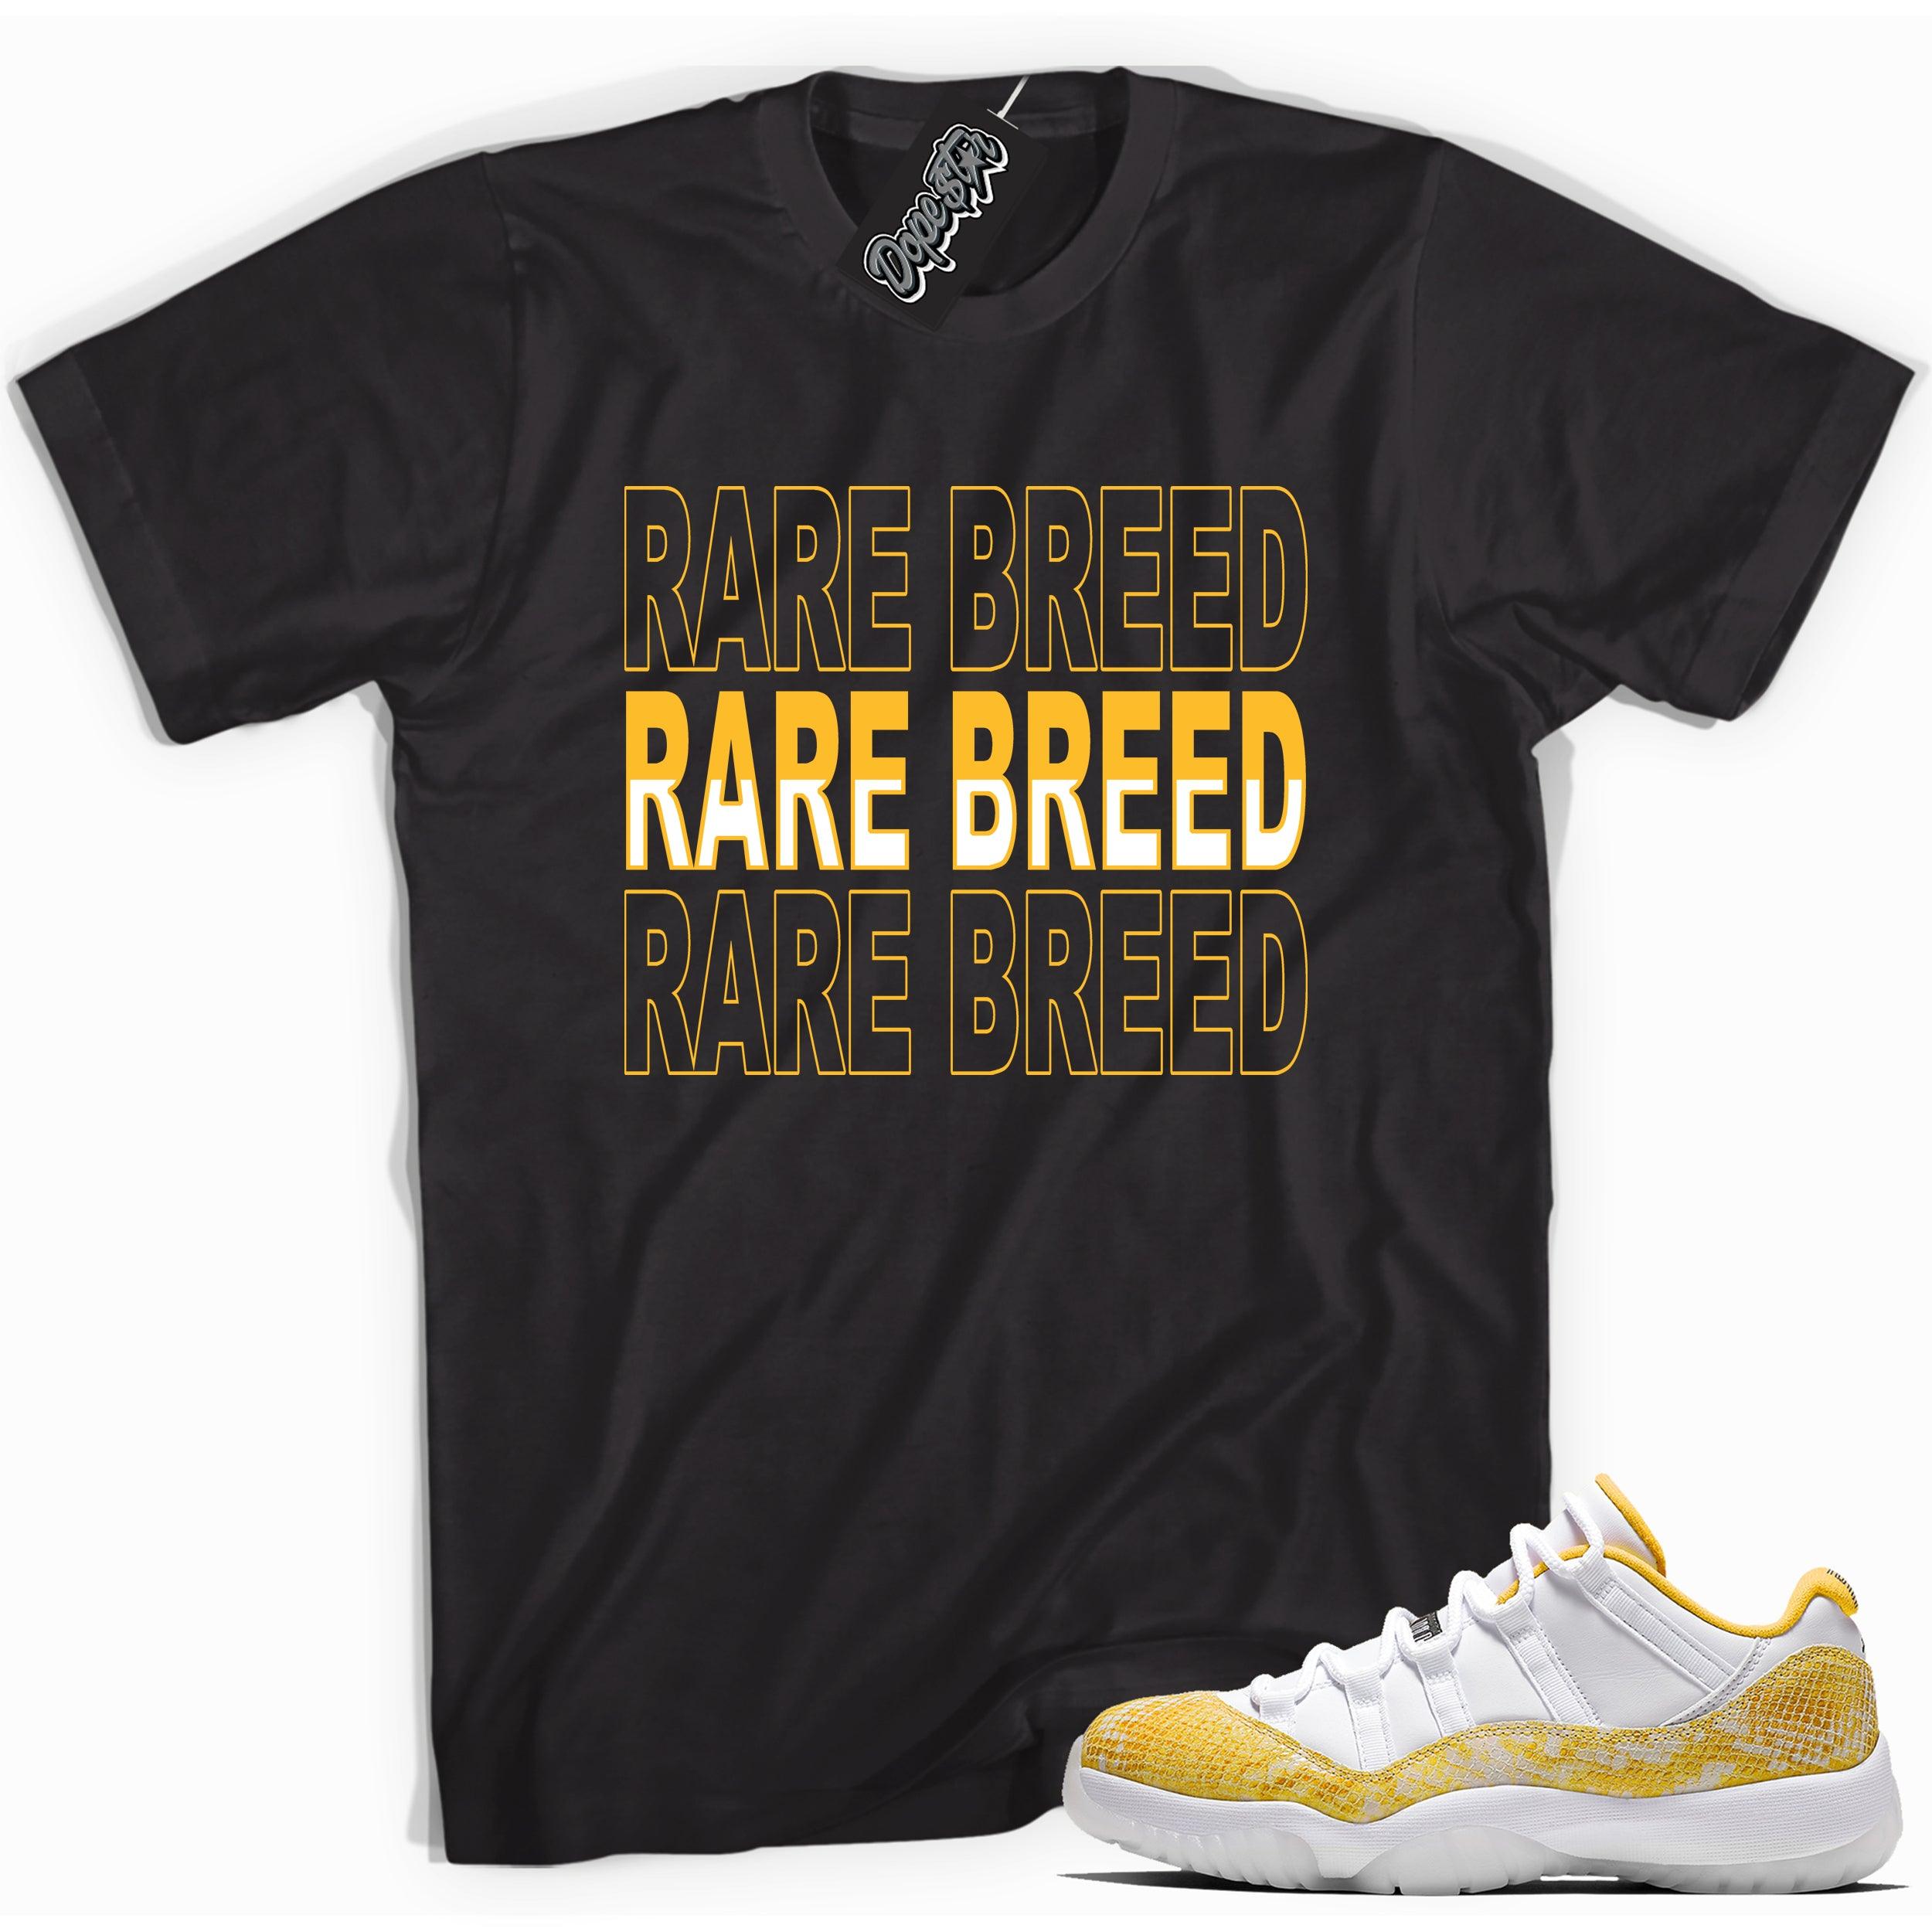 Cool black graphic tee with 'rare breed' print, that perfectly matches  Air Jordan 11 Retro Low Yellow Snakeskin sneakers